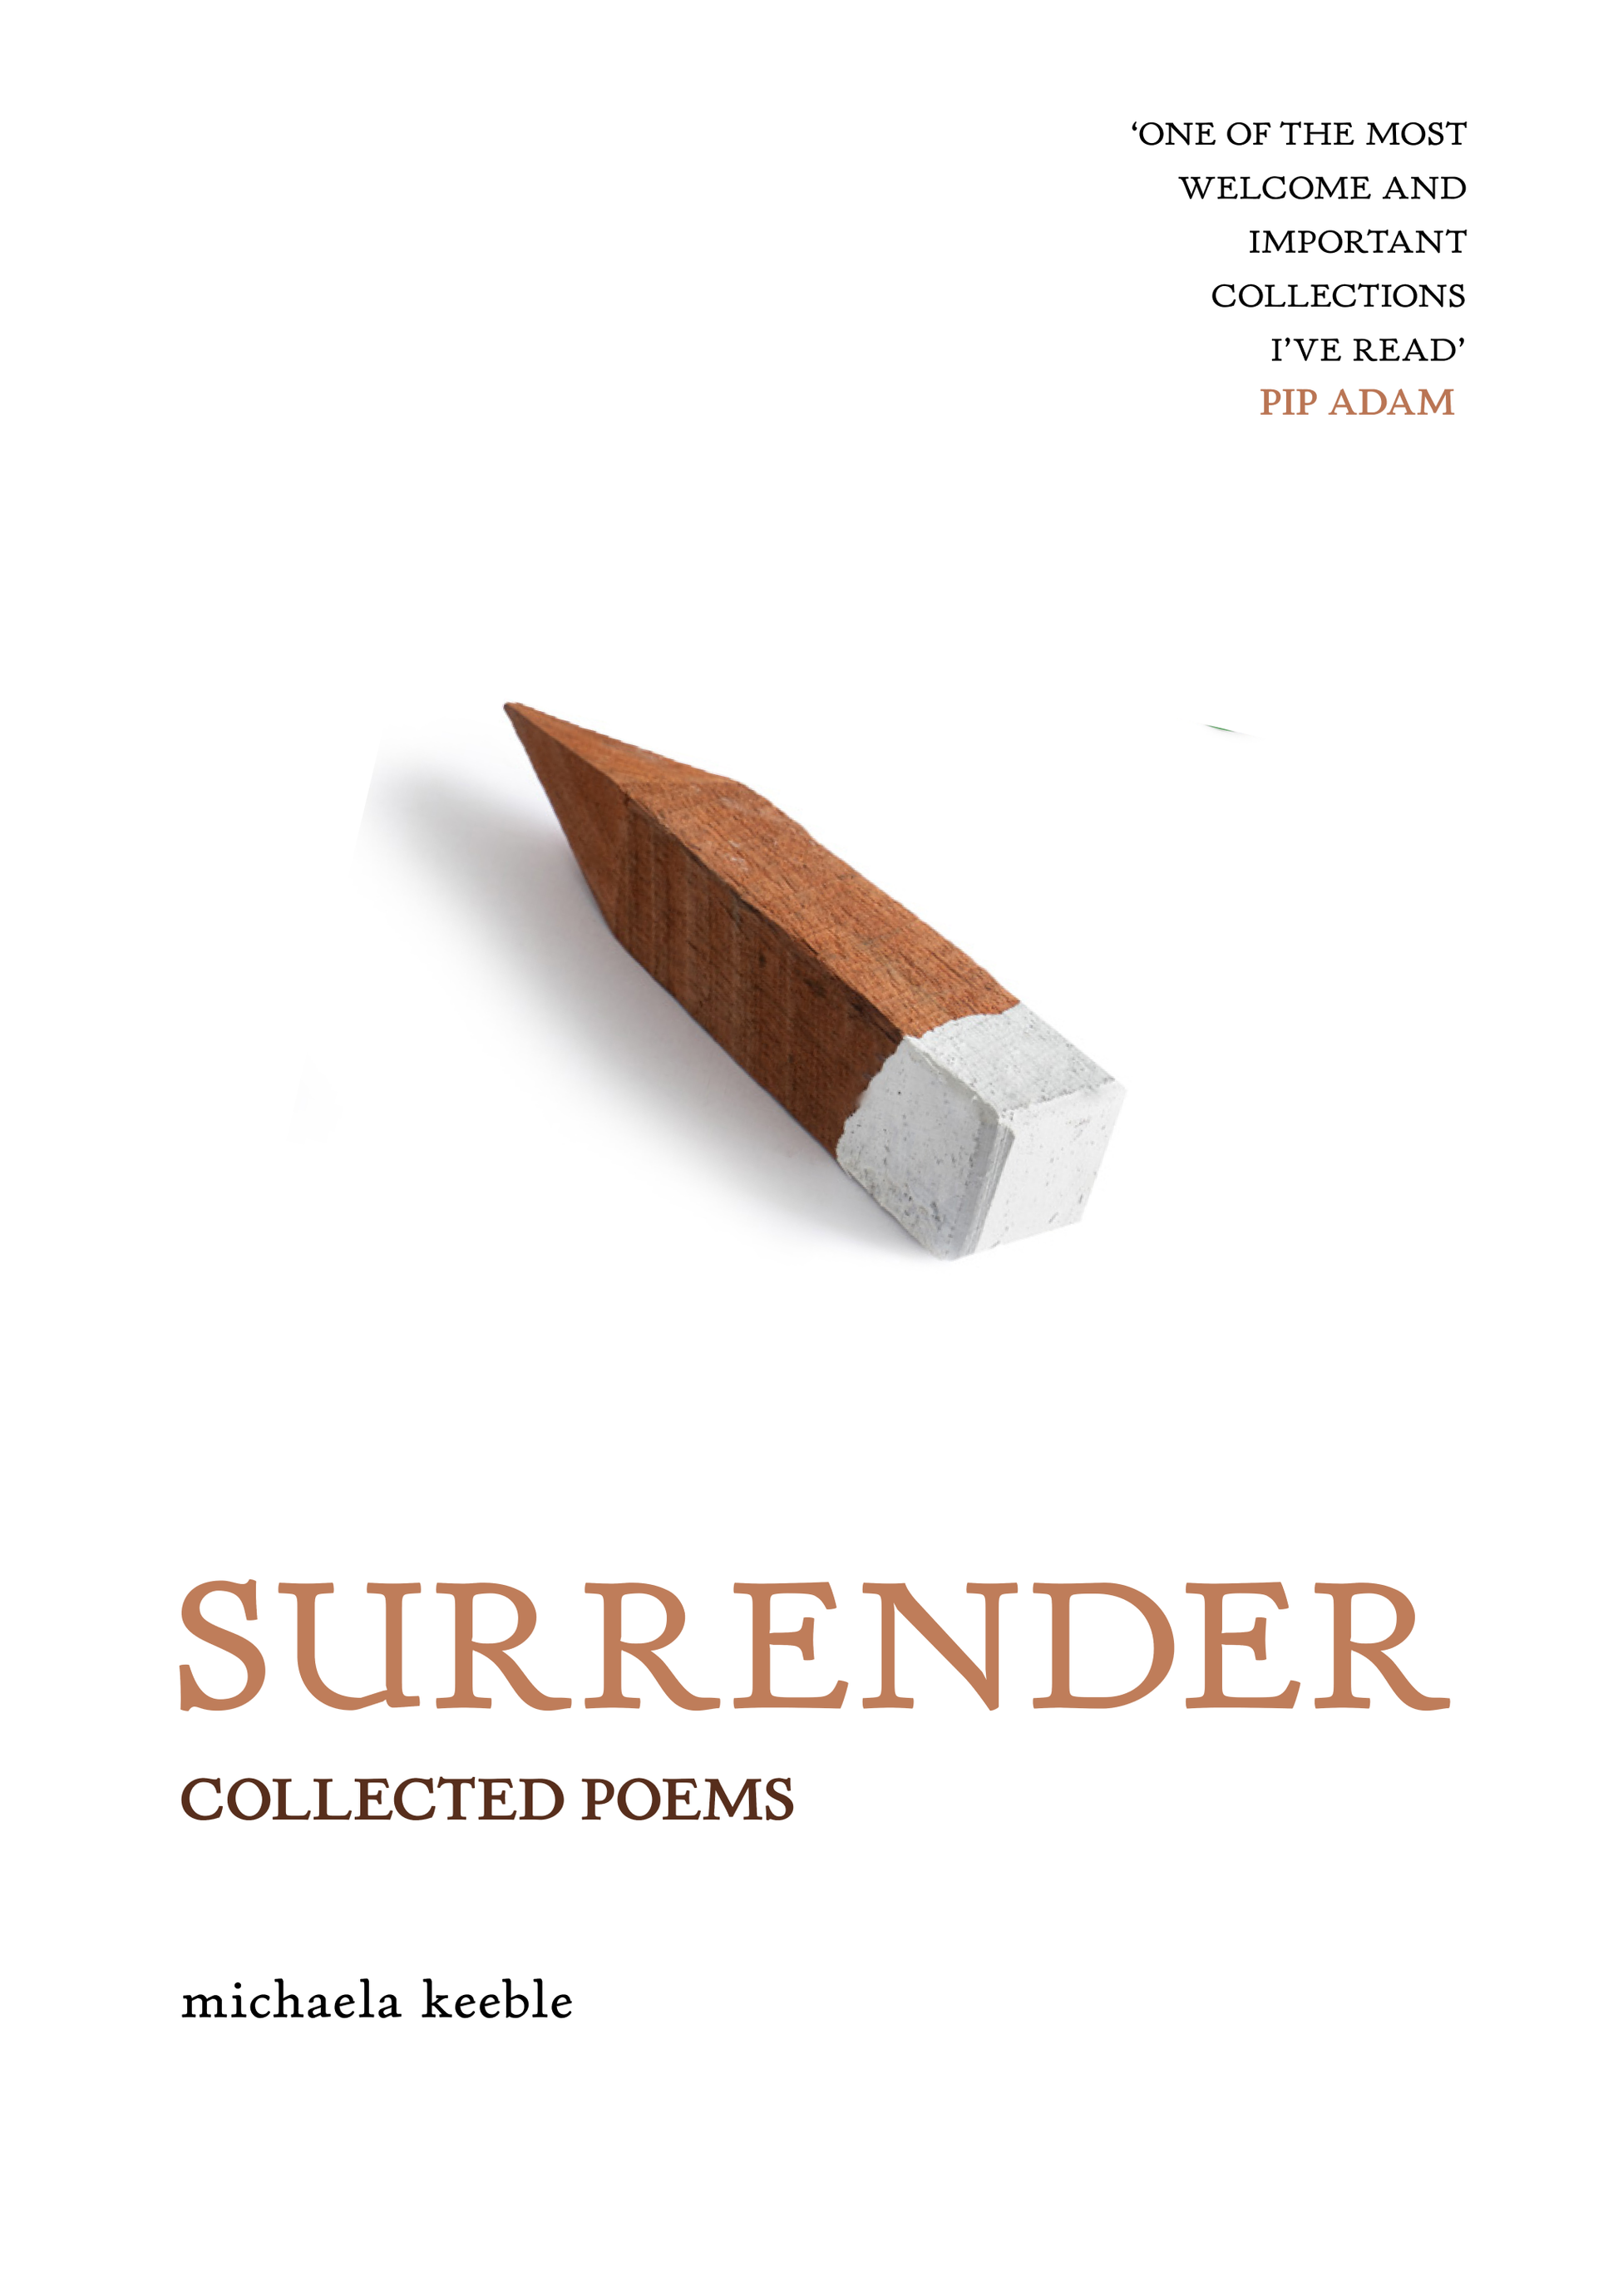 cover image of "surrender: poems" by michaela keeble. image is a survey peg against a white background, appearing to float away from the ground.